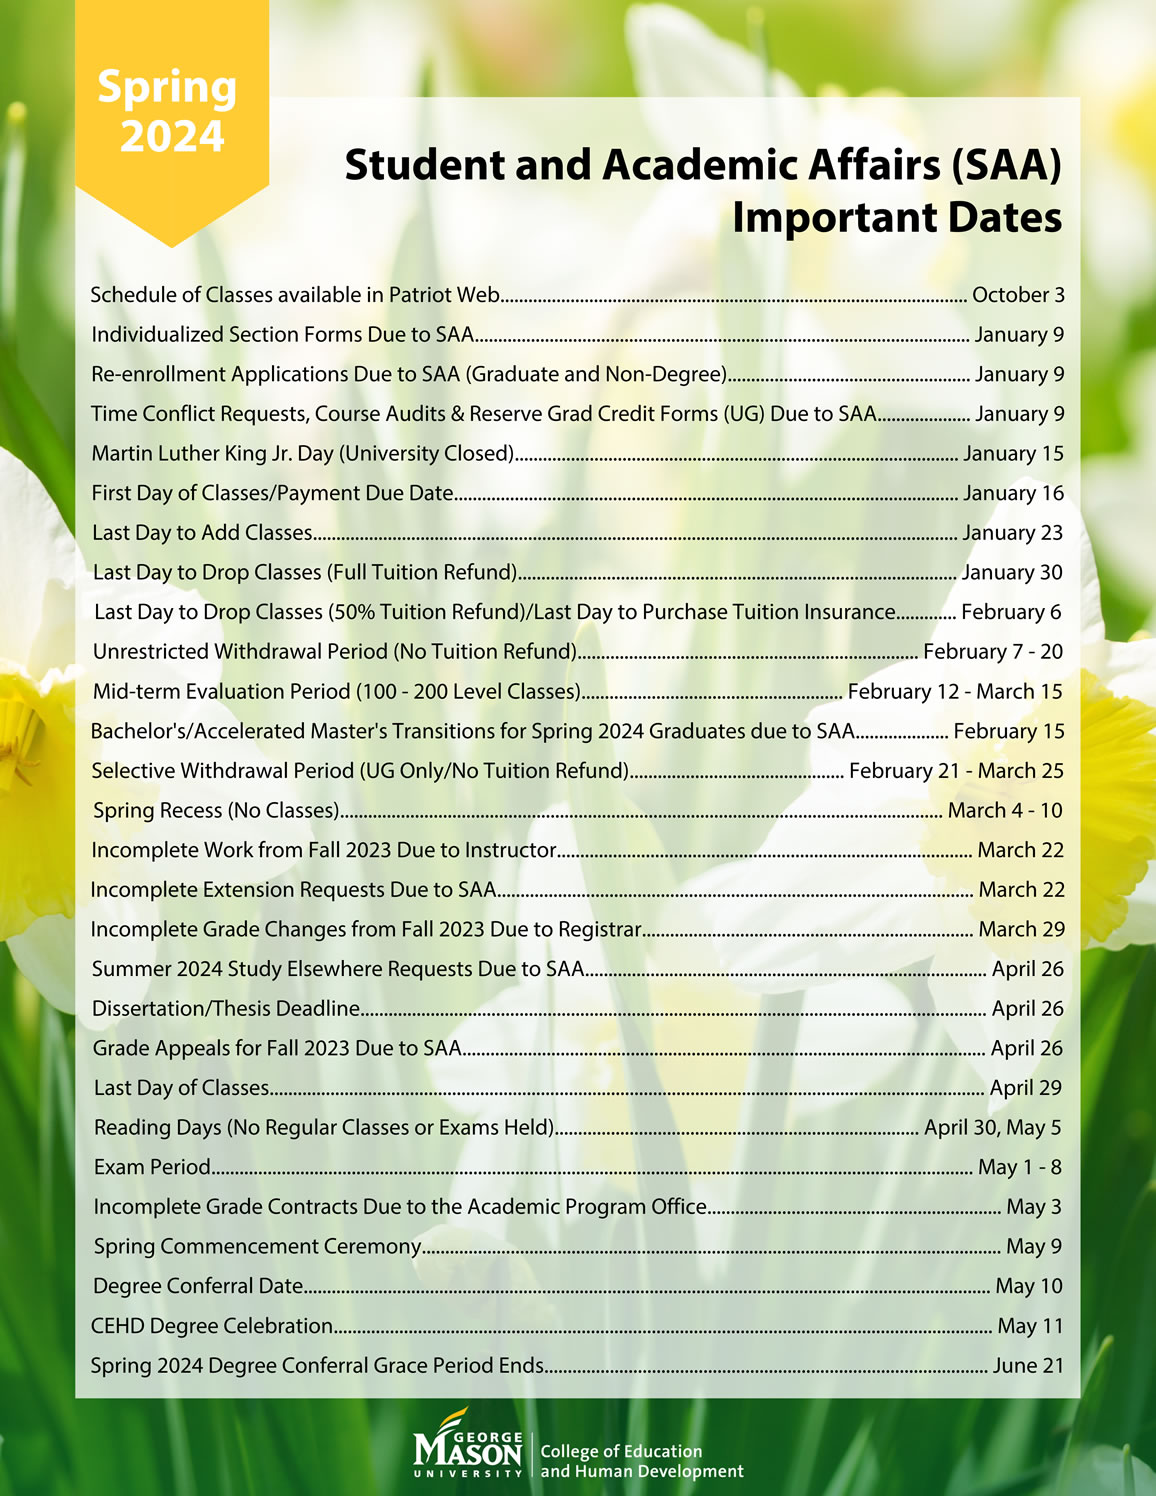 Important dates for Spring 2024 (pdf)